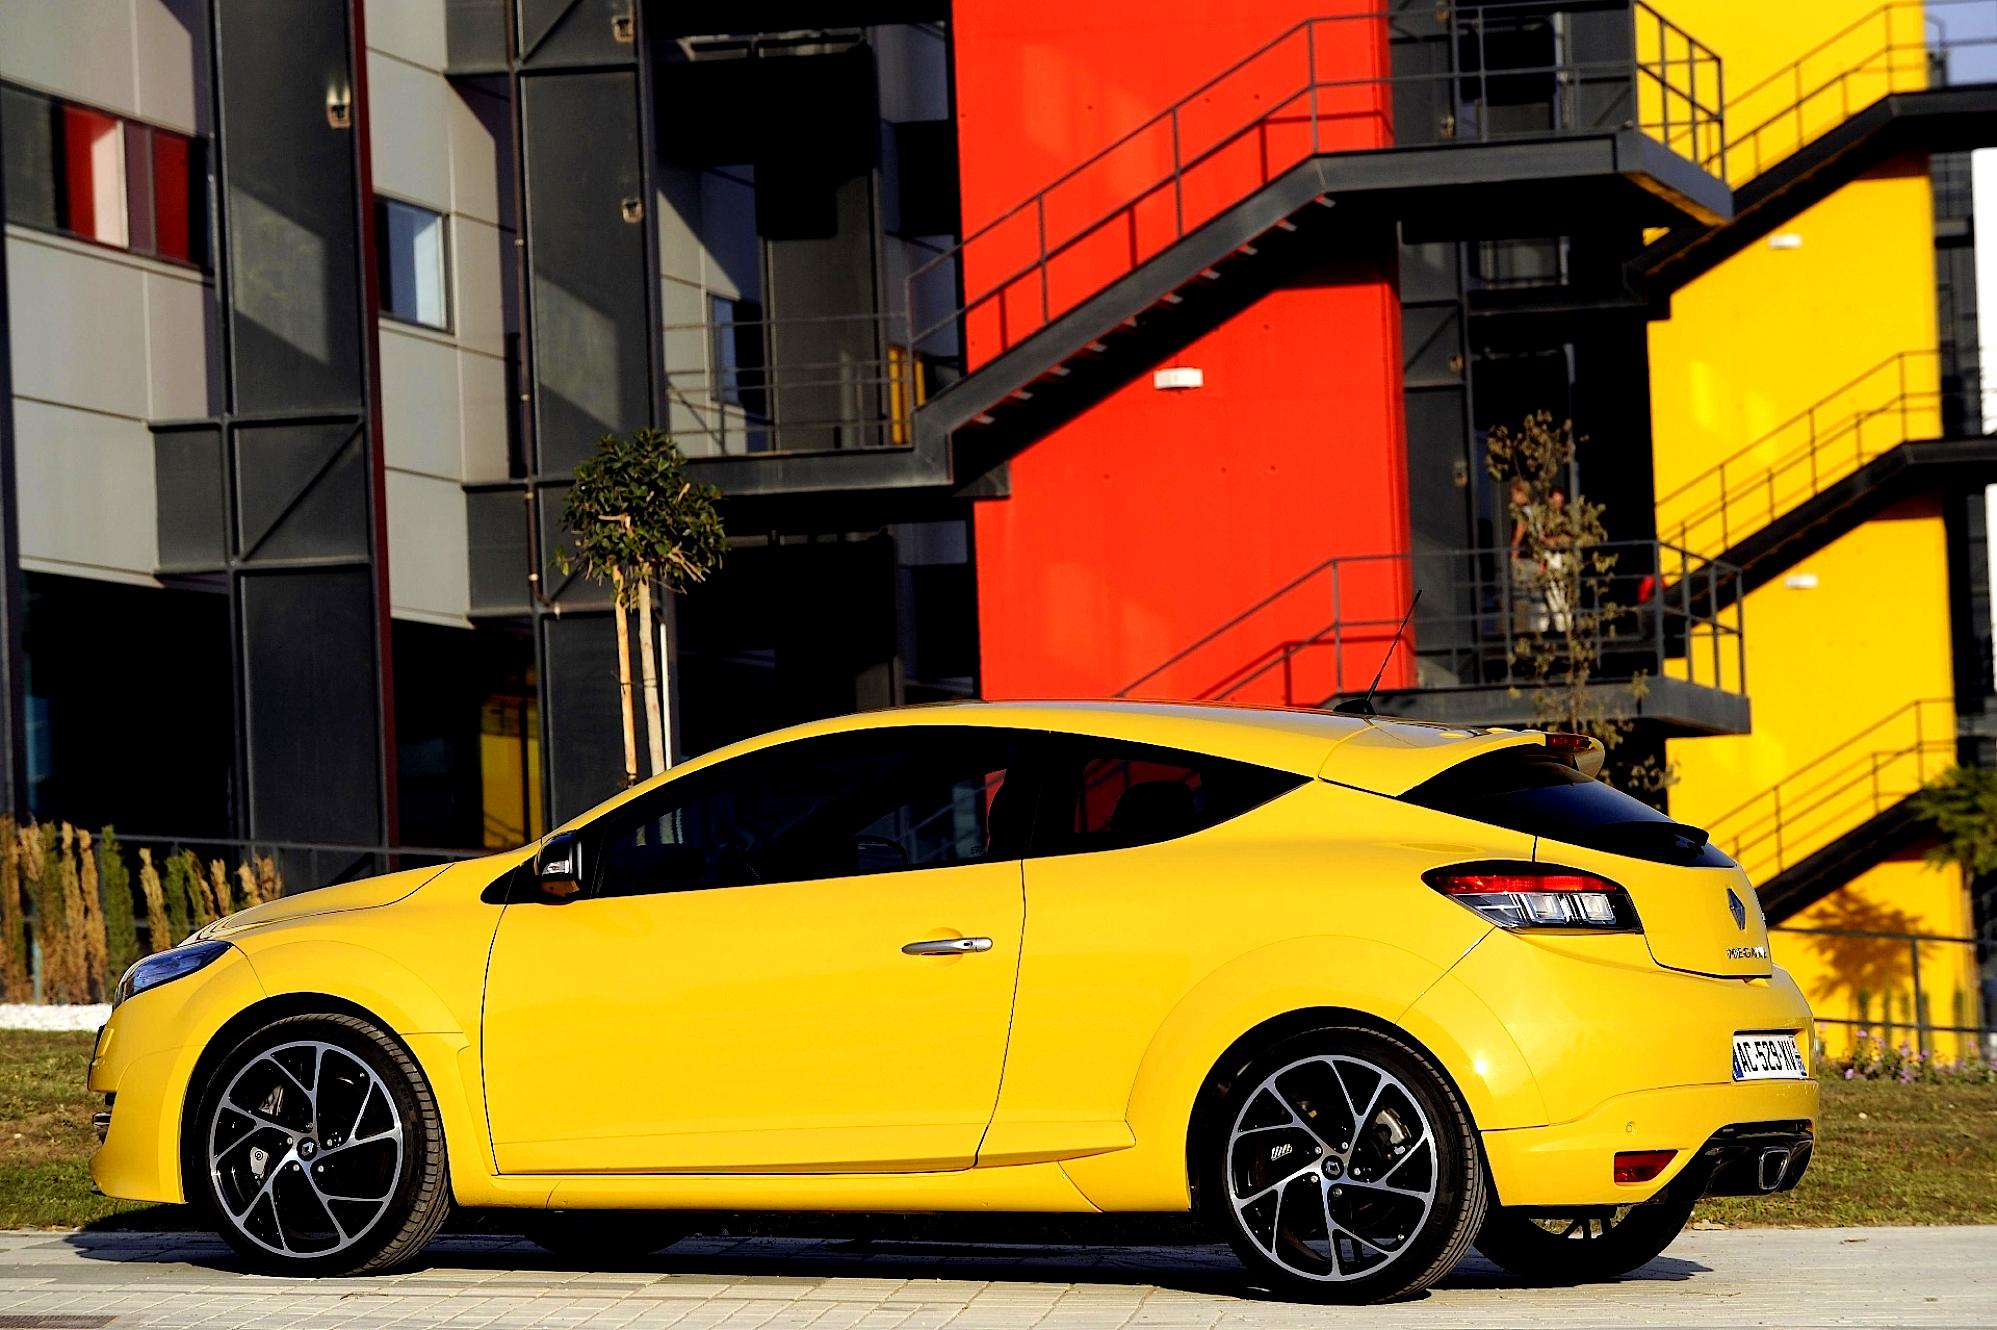 Renault Megane RS Coupe 2009 #1